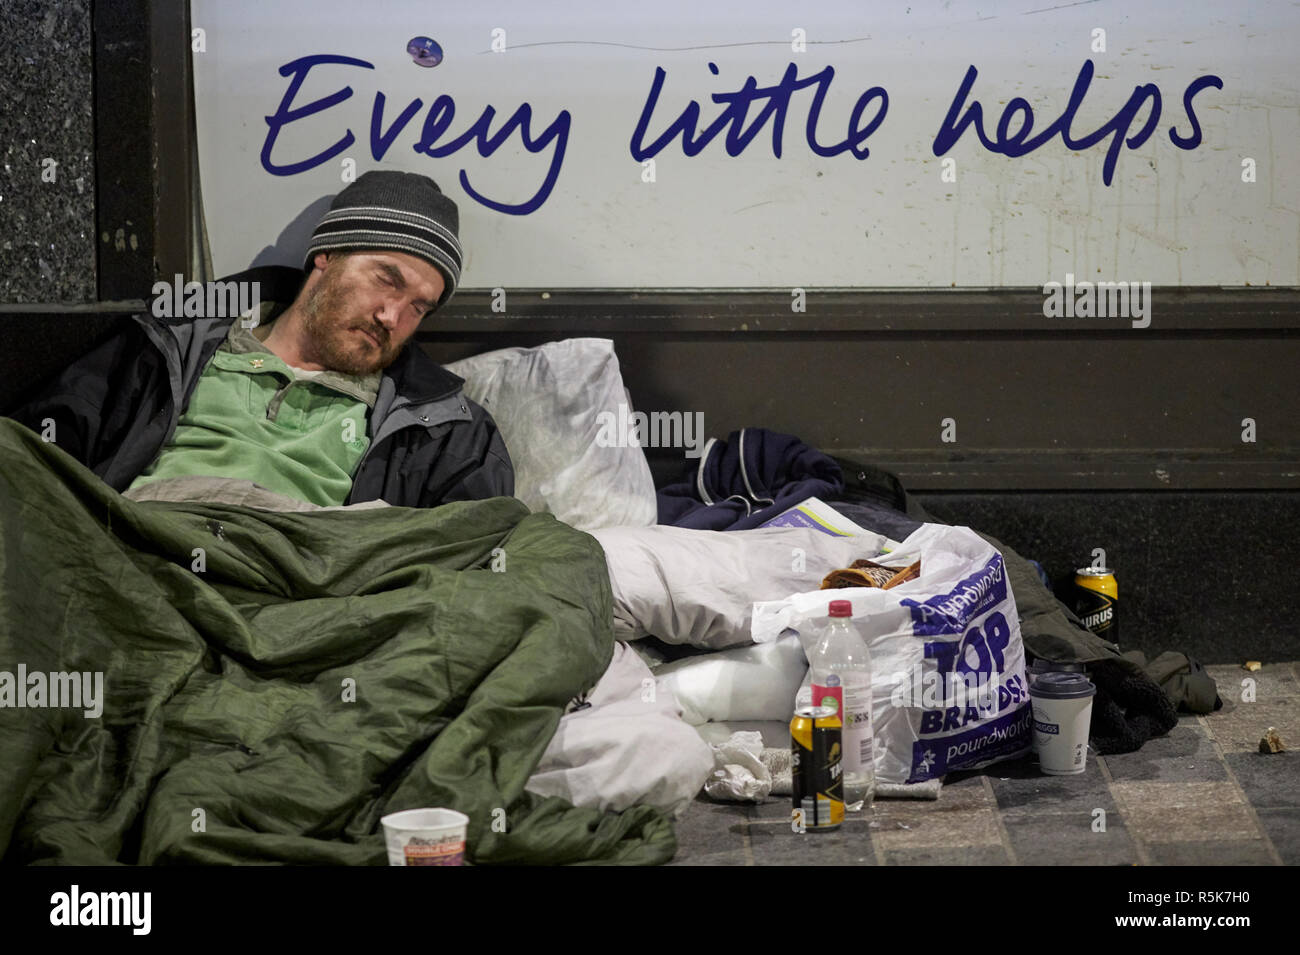 Liverpool city centre sleeping homeless begging man with mess around him as he sleeps, every little helps tesco slogan Stock Photo